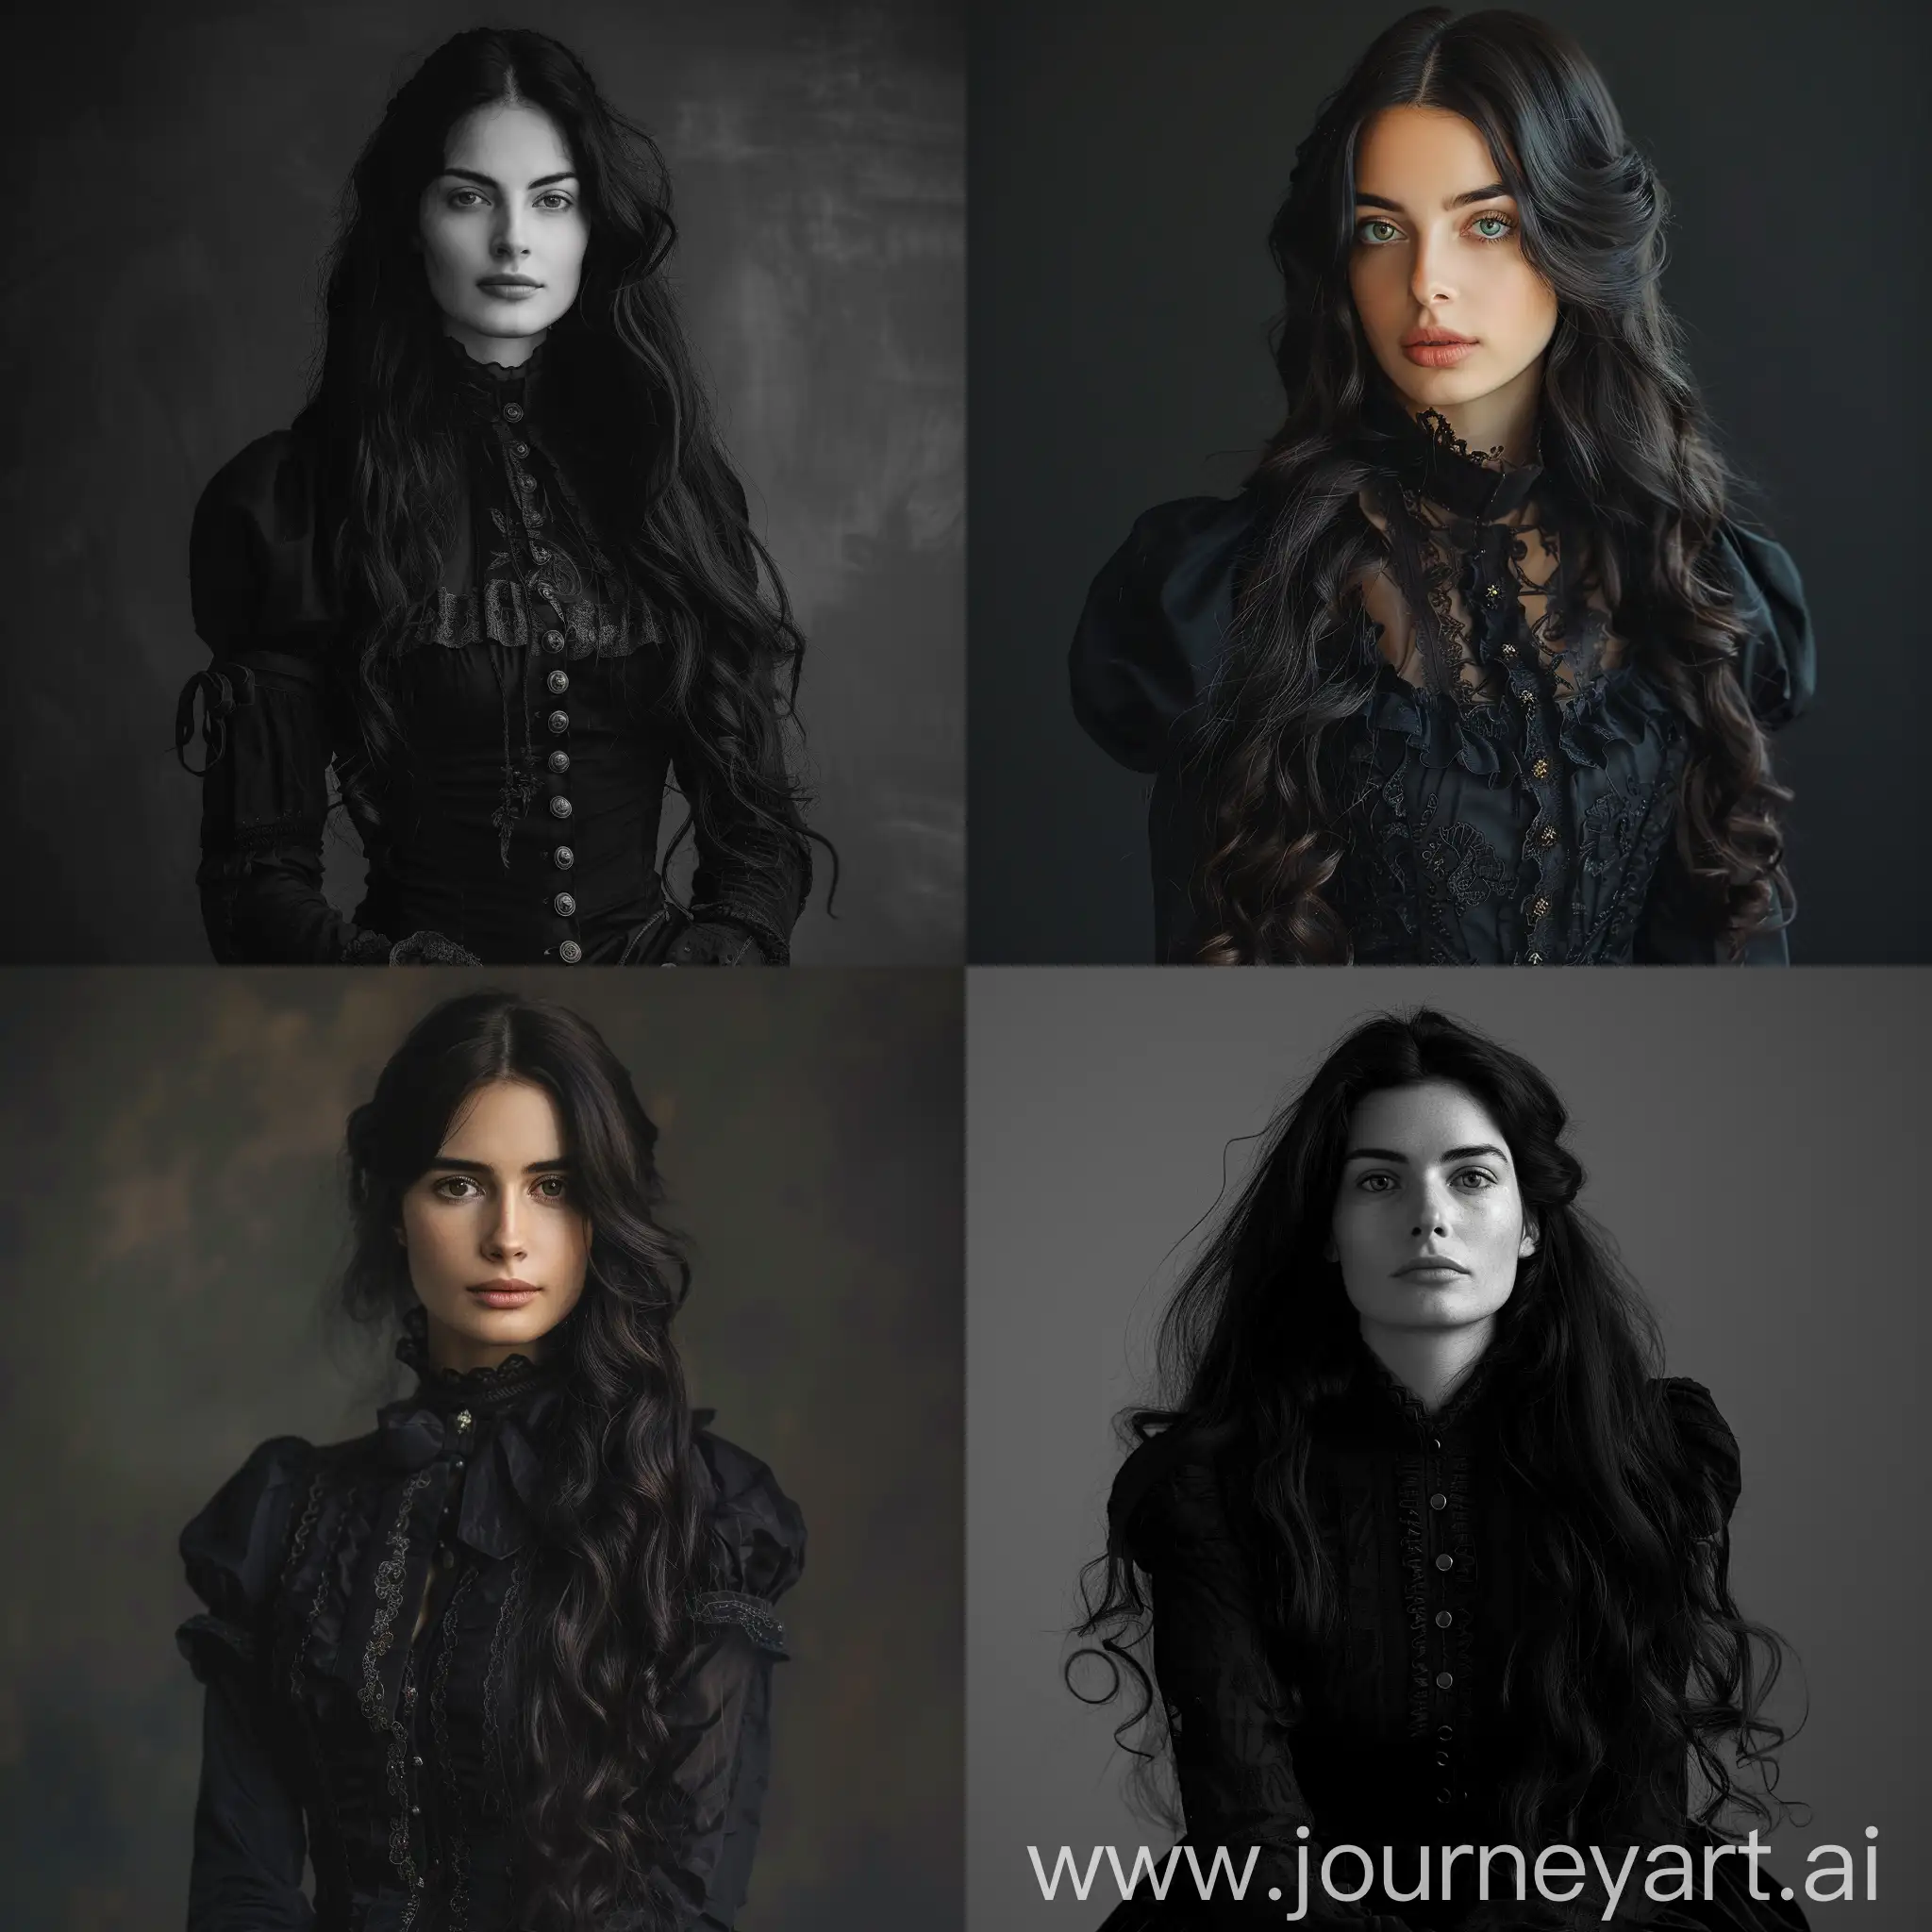 Young-Woman-in-Dark-Victorian-Attire-with-Superreal-Appearance